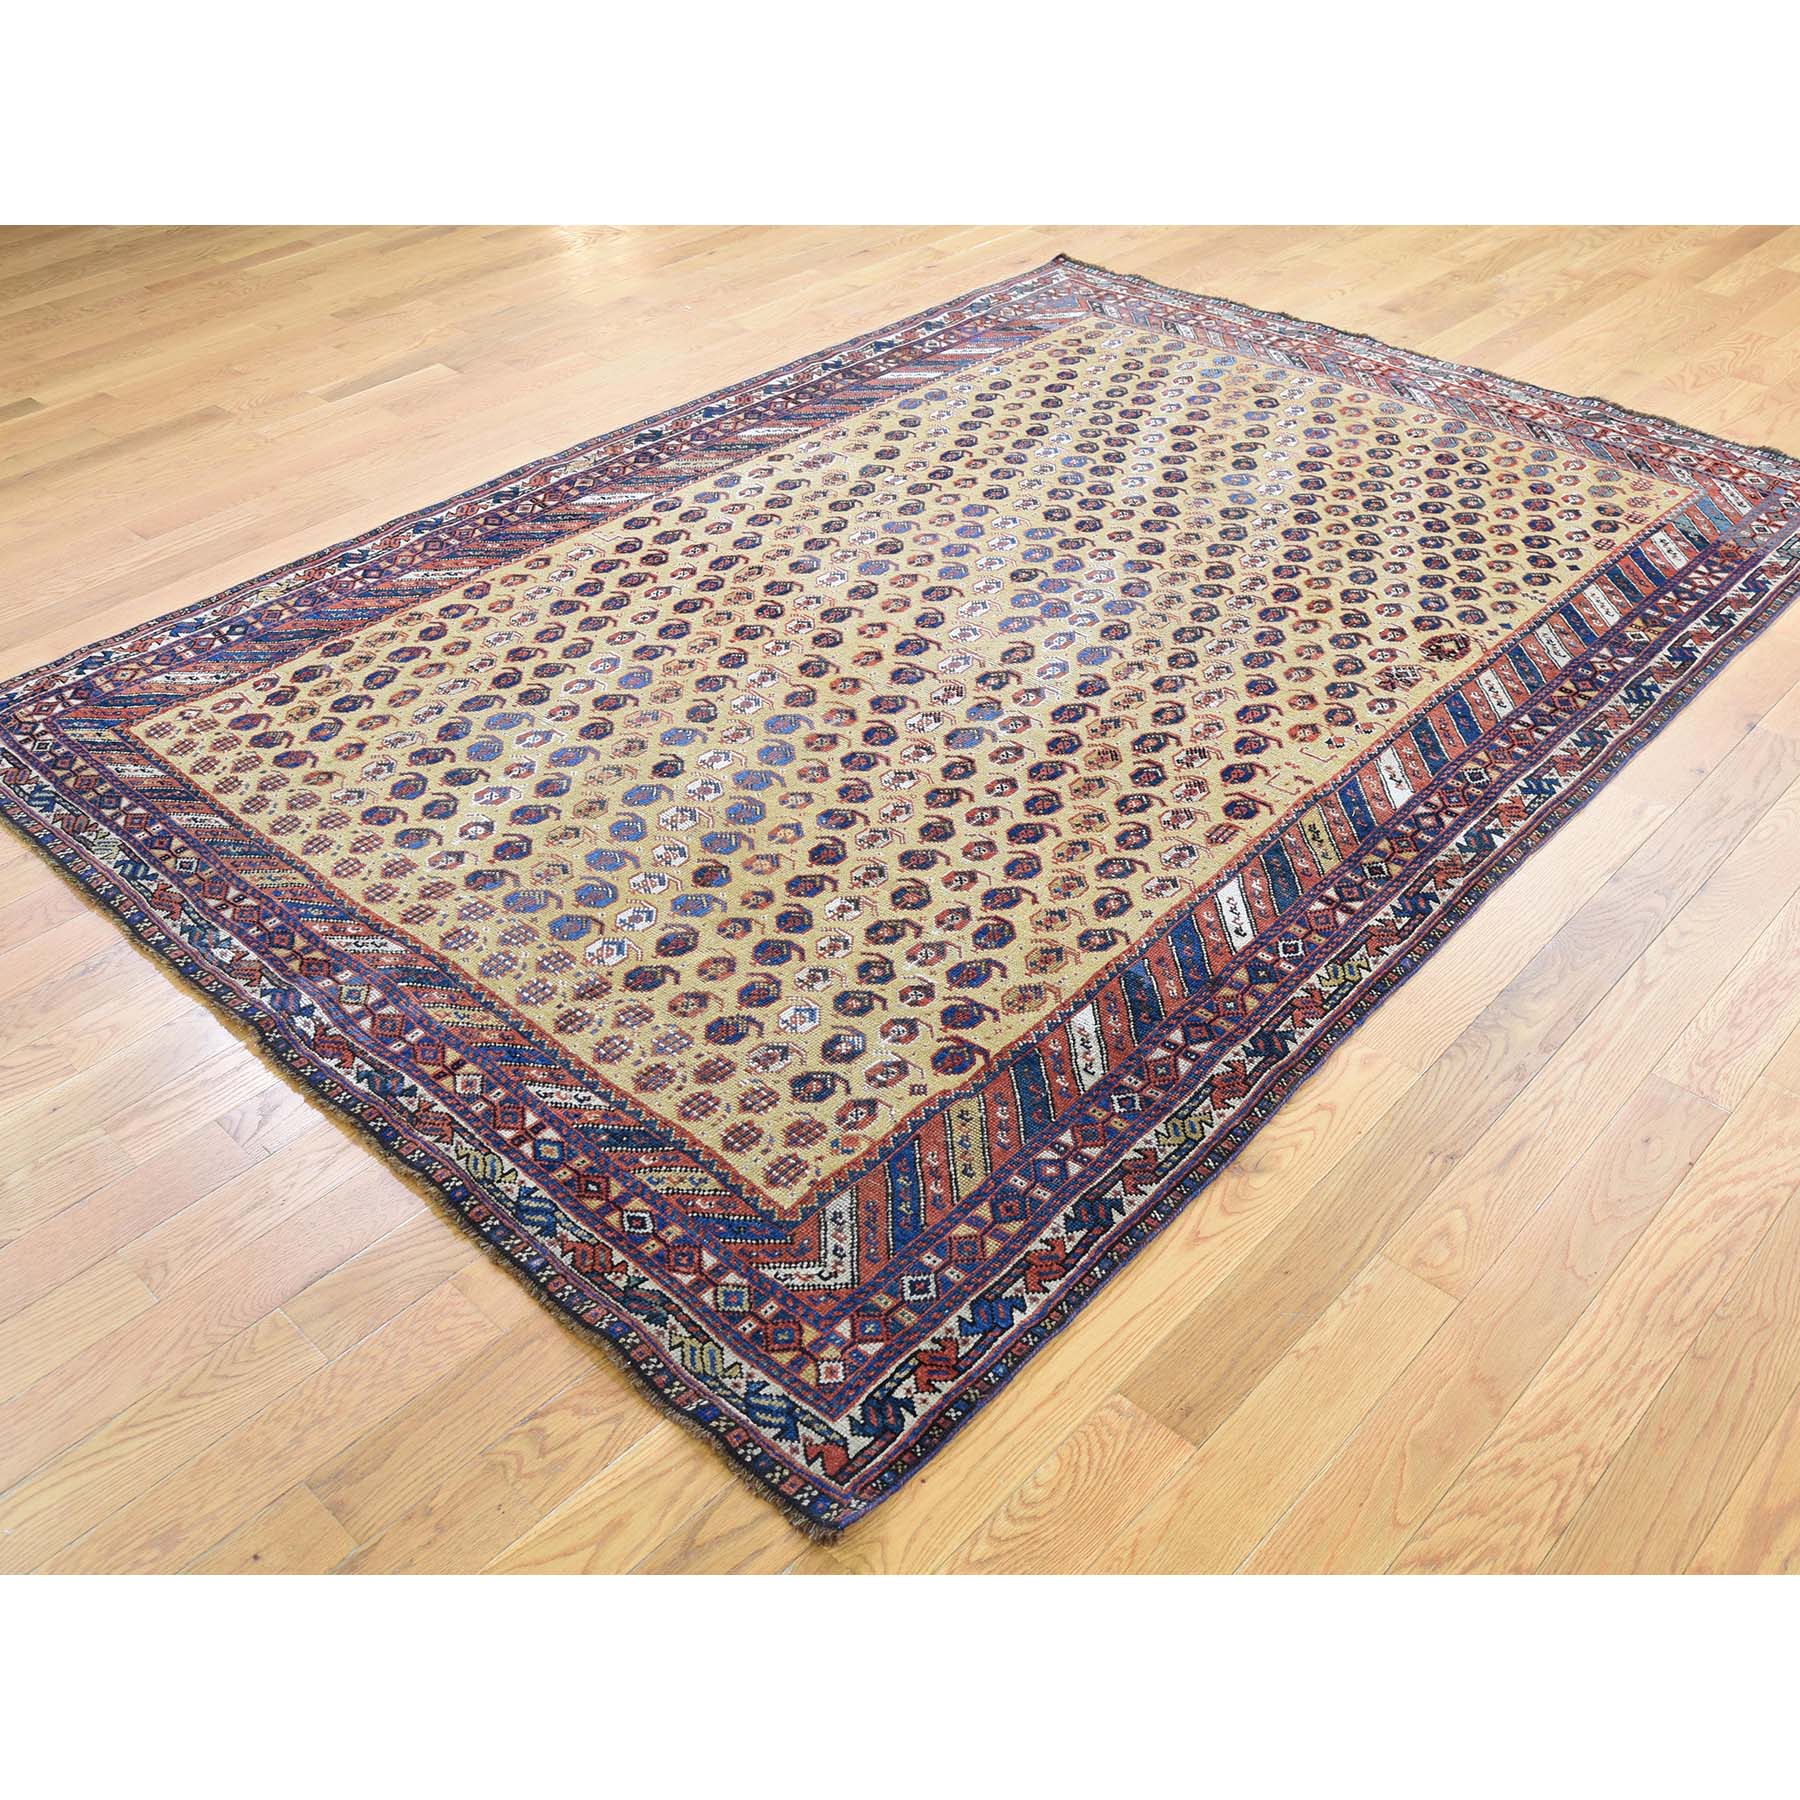 5-9 x7-10  Antique Persian Afshar Even Wear Good Condition Hand-Knotted Oriental Rug 